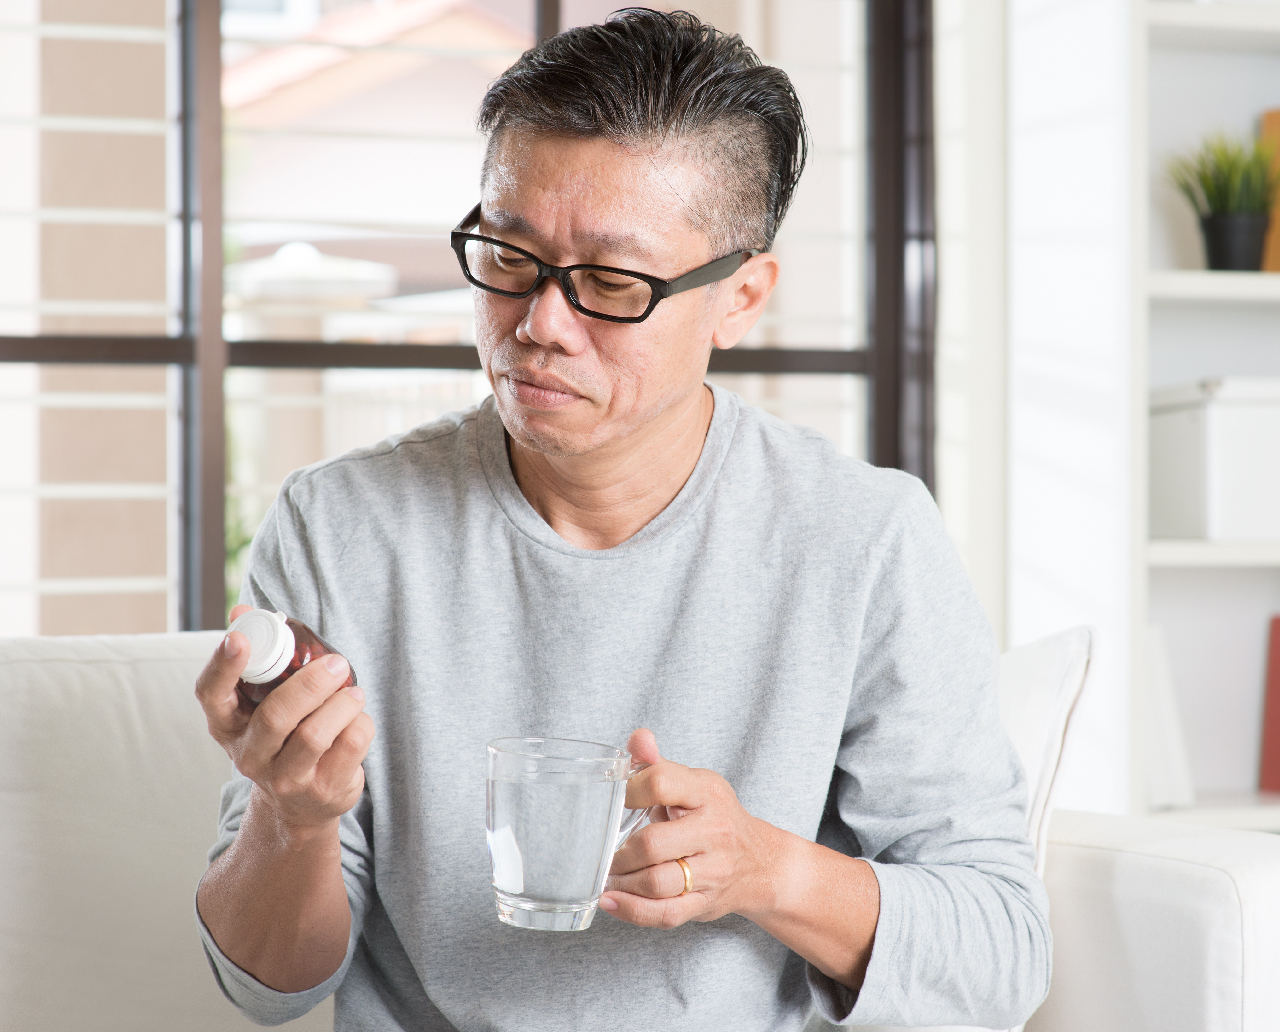 Patient at Home Looking at Pill Bottle